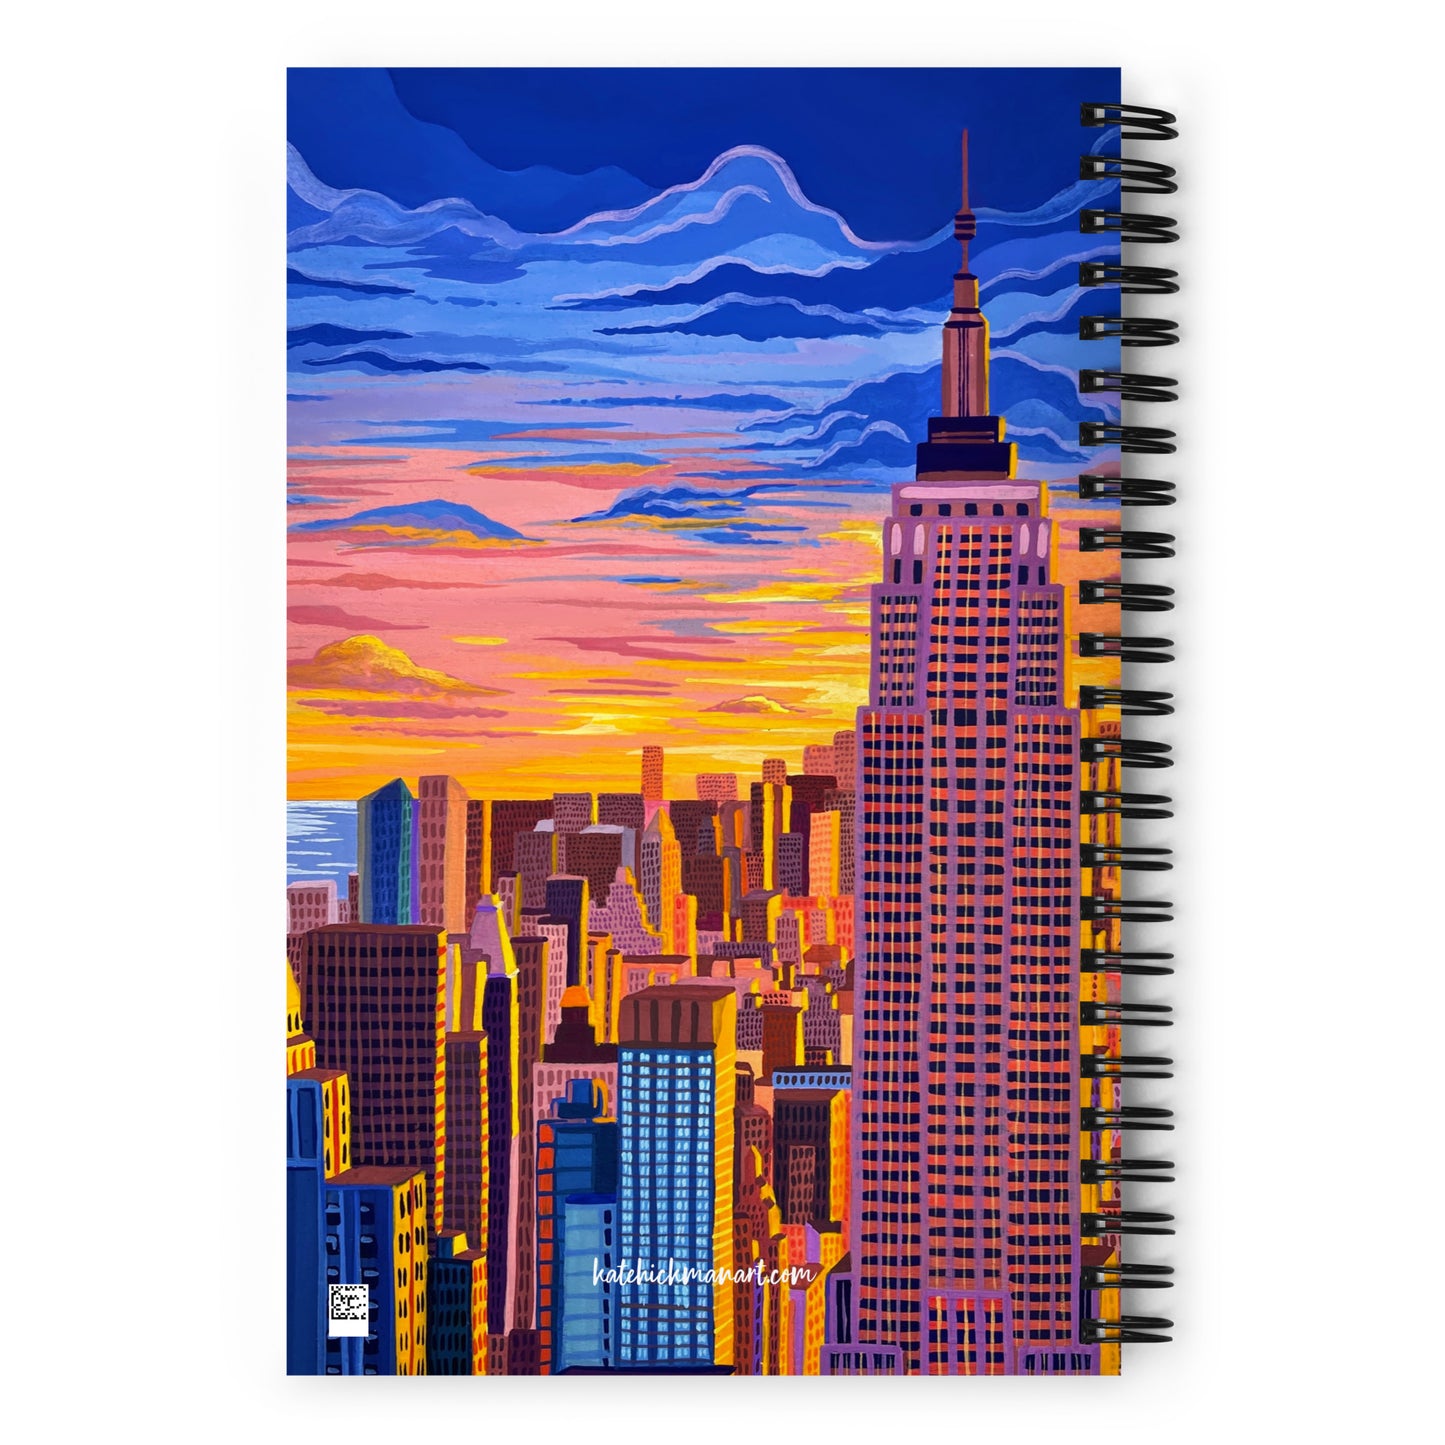 NYC Notebook